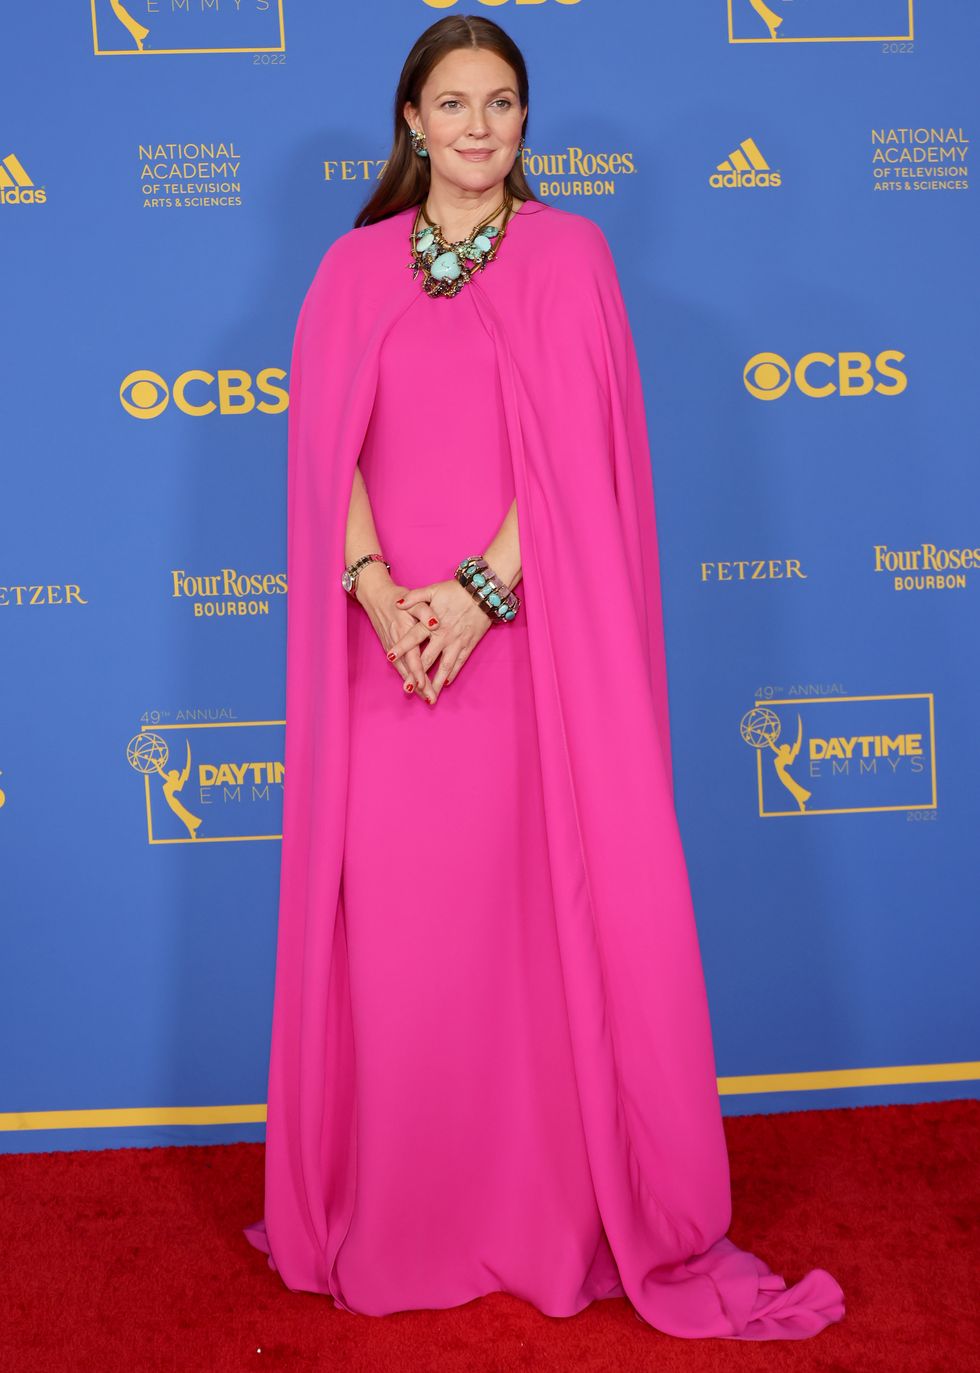 'the drew barrymore show' host drew barrymore at the 2022 daytime emmy awards